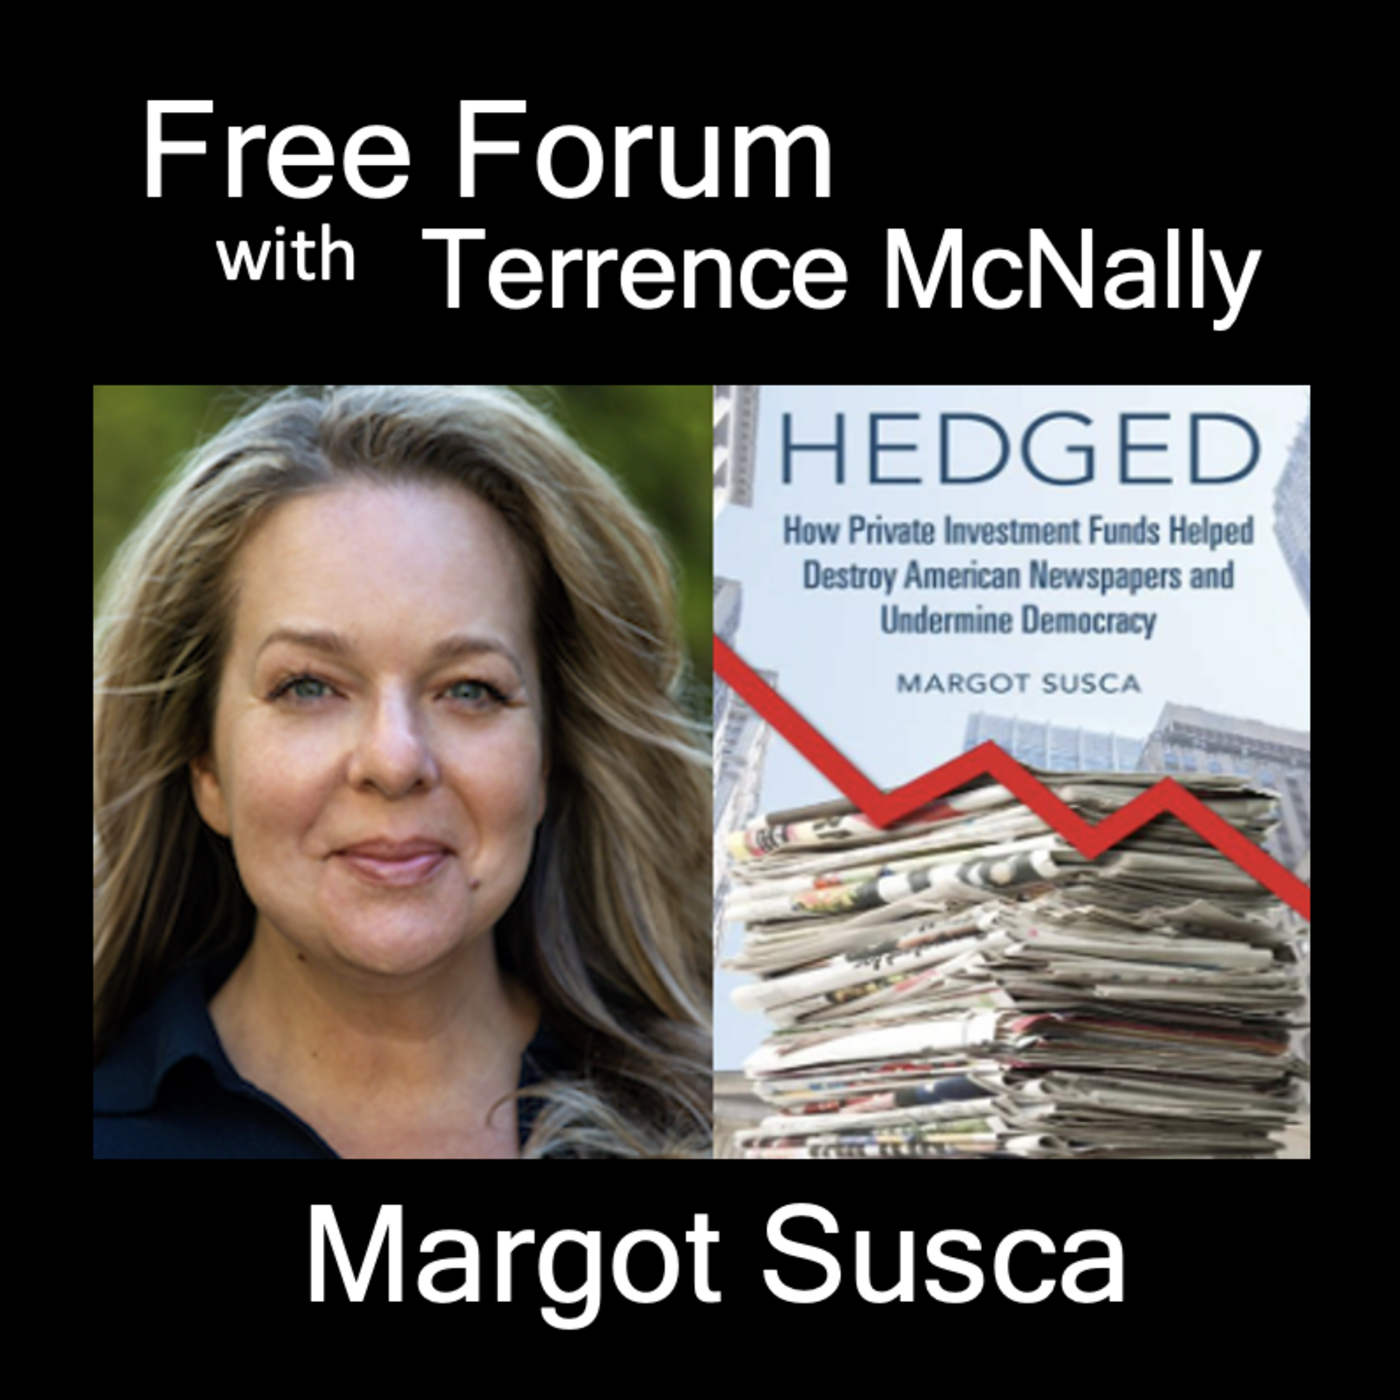 Episode 631: MARGOT SUSCA-HEDGED: How Private Investment Funds Helped Destroy American Newspapers and Undermine Democracy